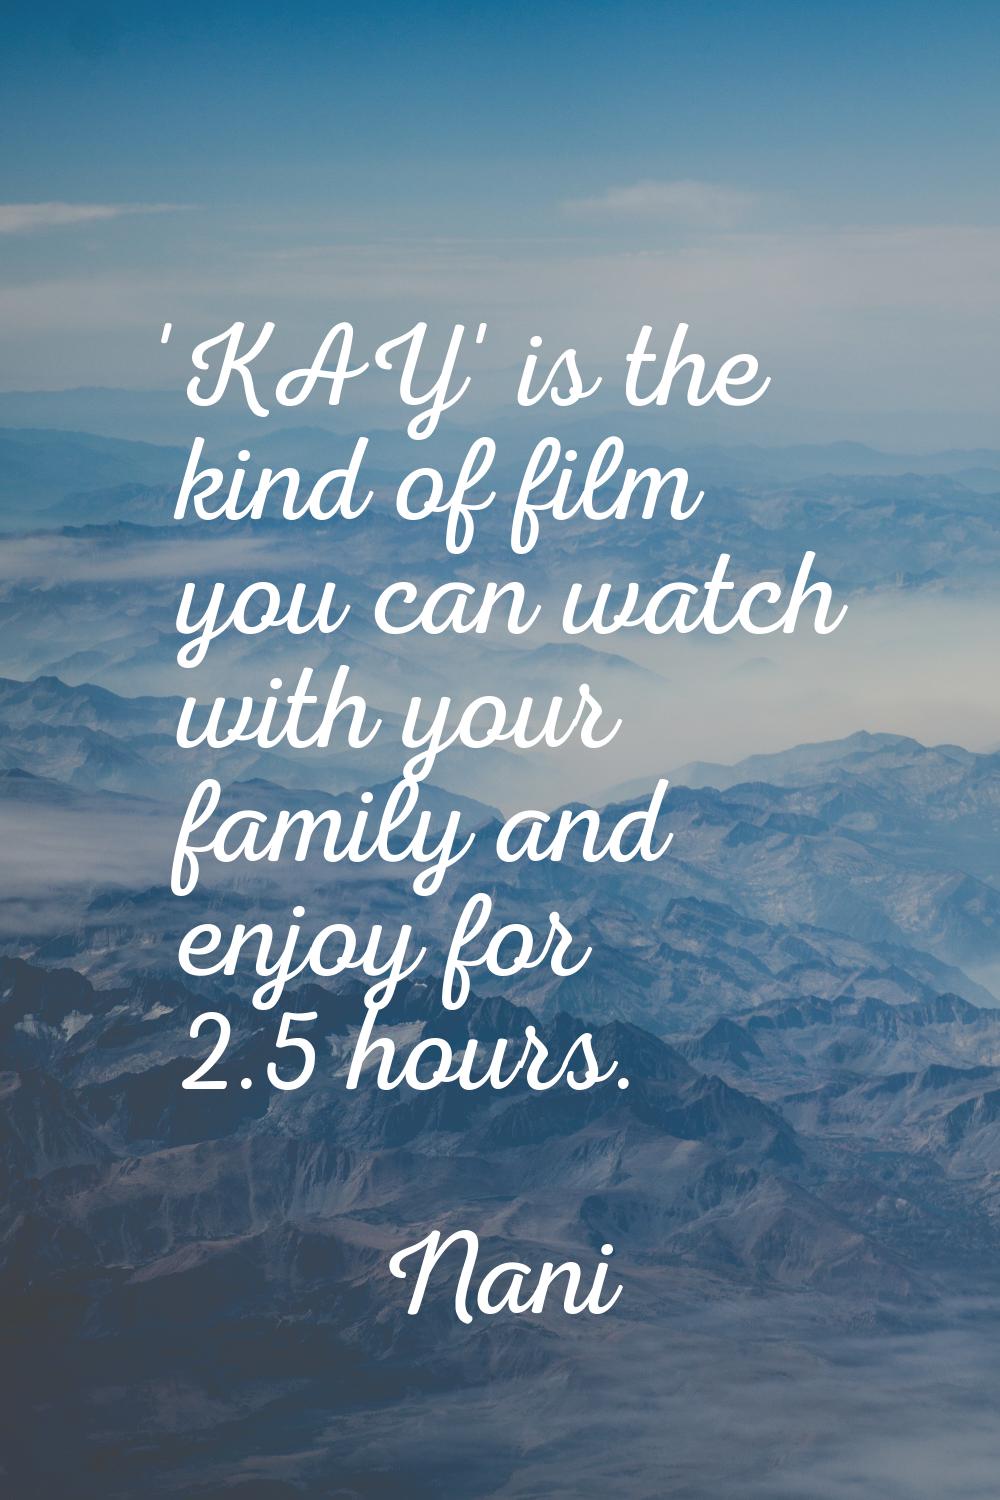 'KAY' is the kind of film you can watch with your family and enjoy for 2.5 hours.